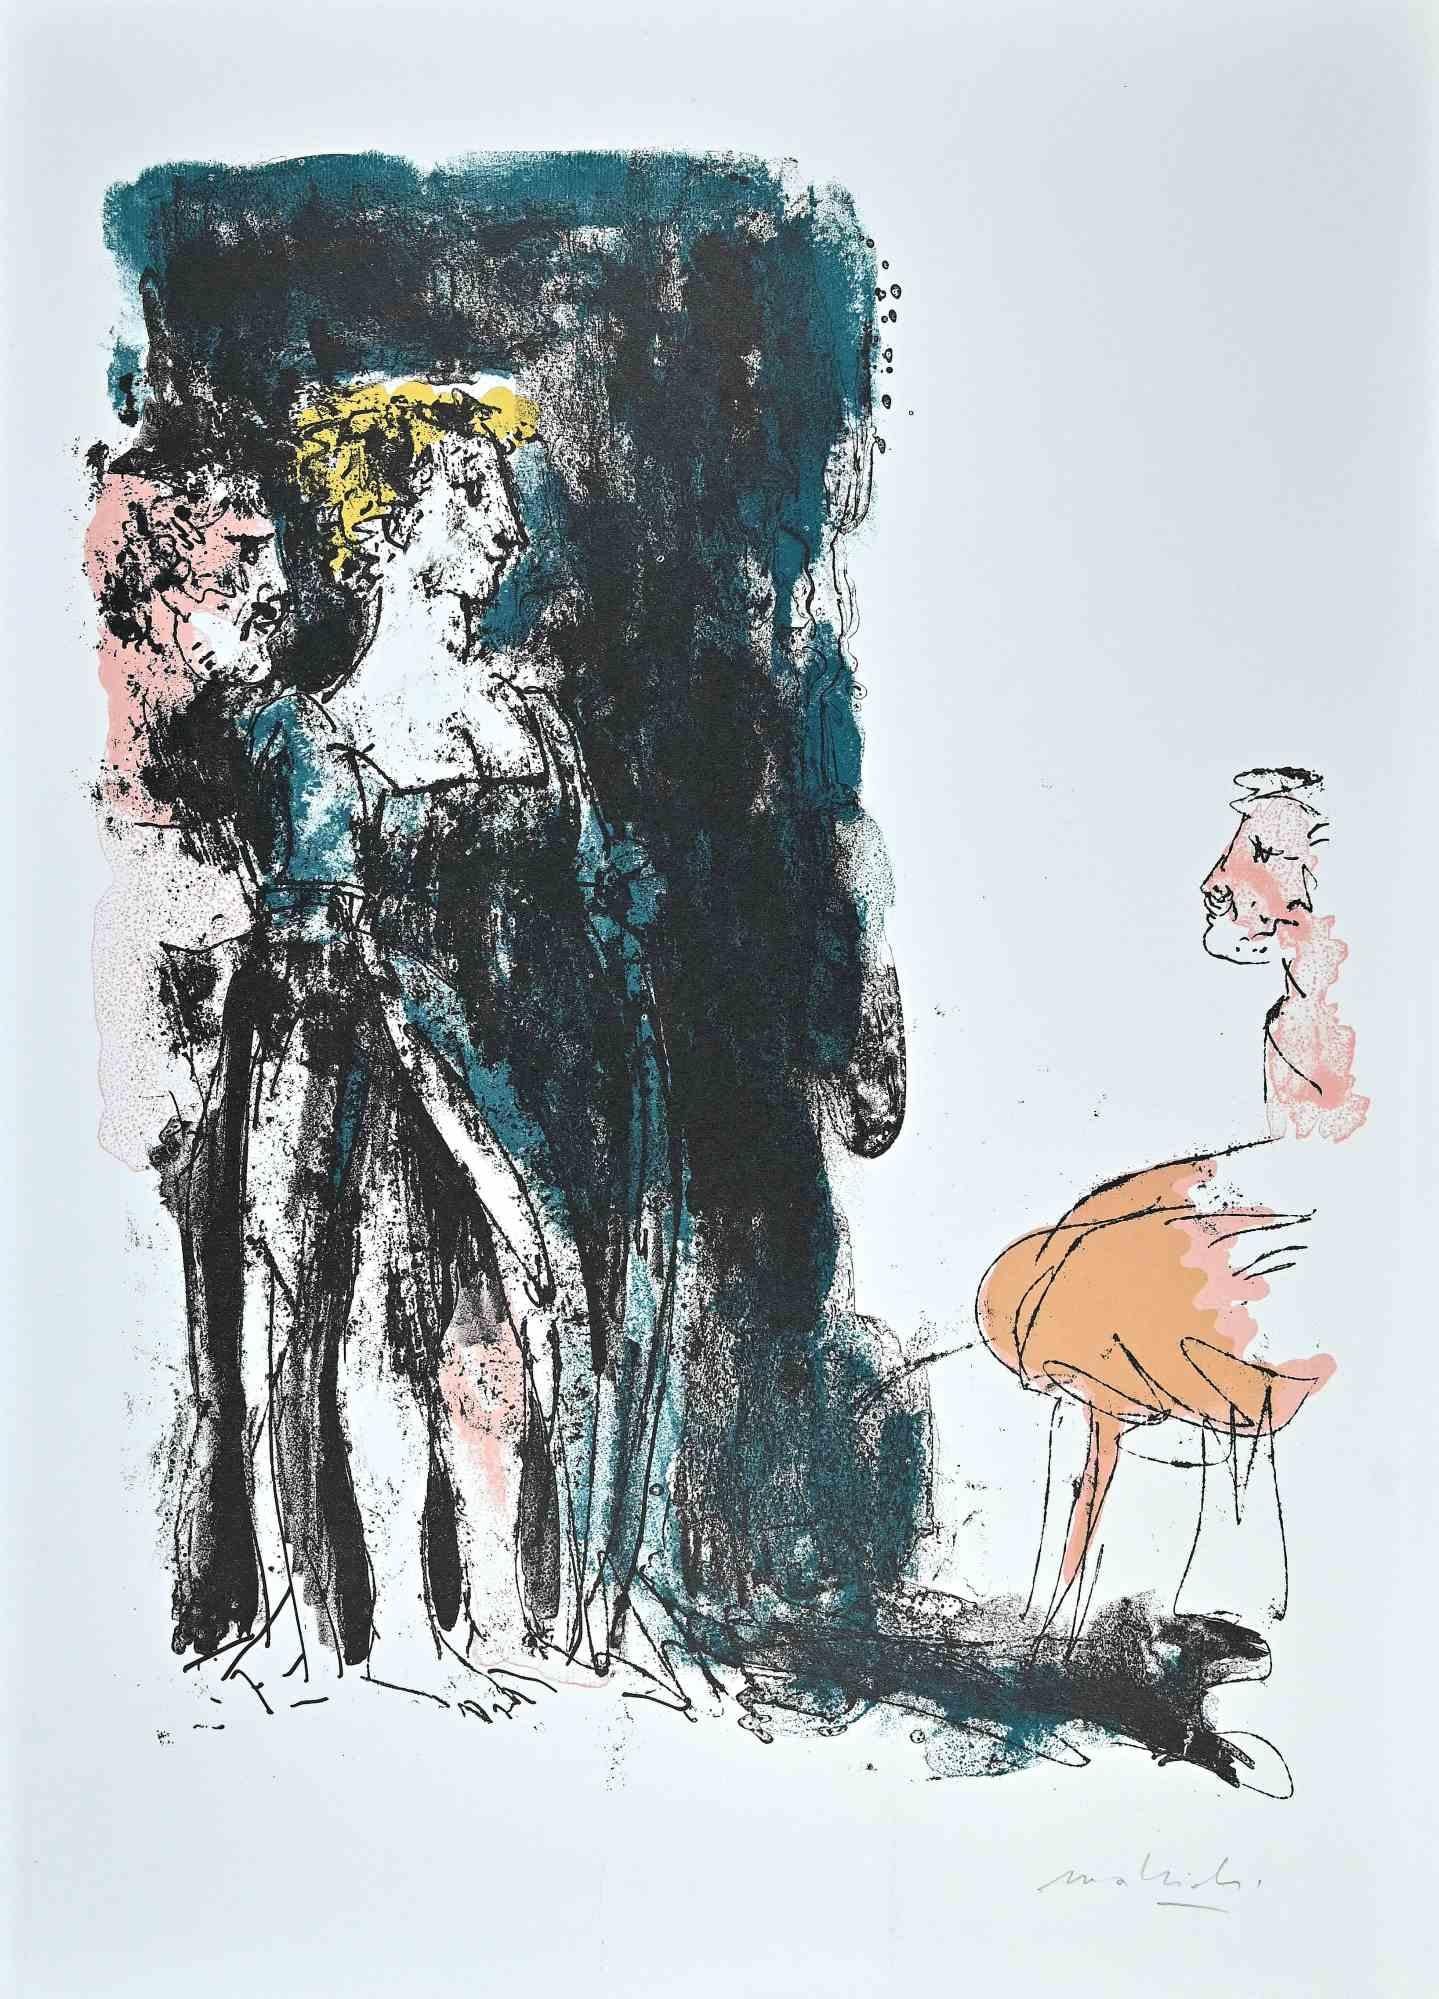 The Gentle Meeting is the original etching and aquatint on paper realized by  Carlo Mattioli in the 1970s.

Hand-signed on the lower.

Very good conditions.

The artwork is expressed through deft strokes with minimalistic colors applied in a